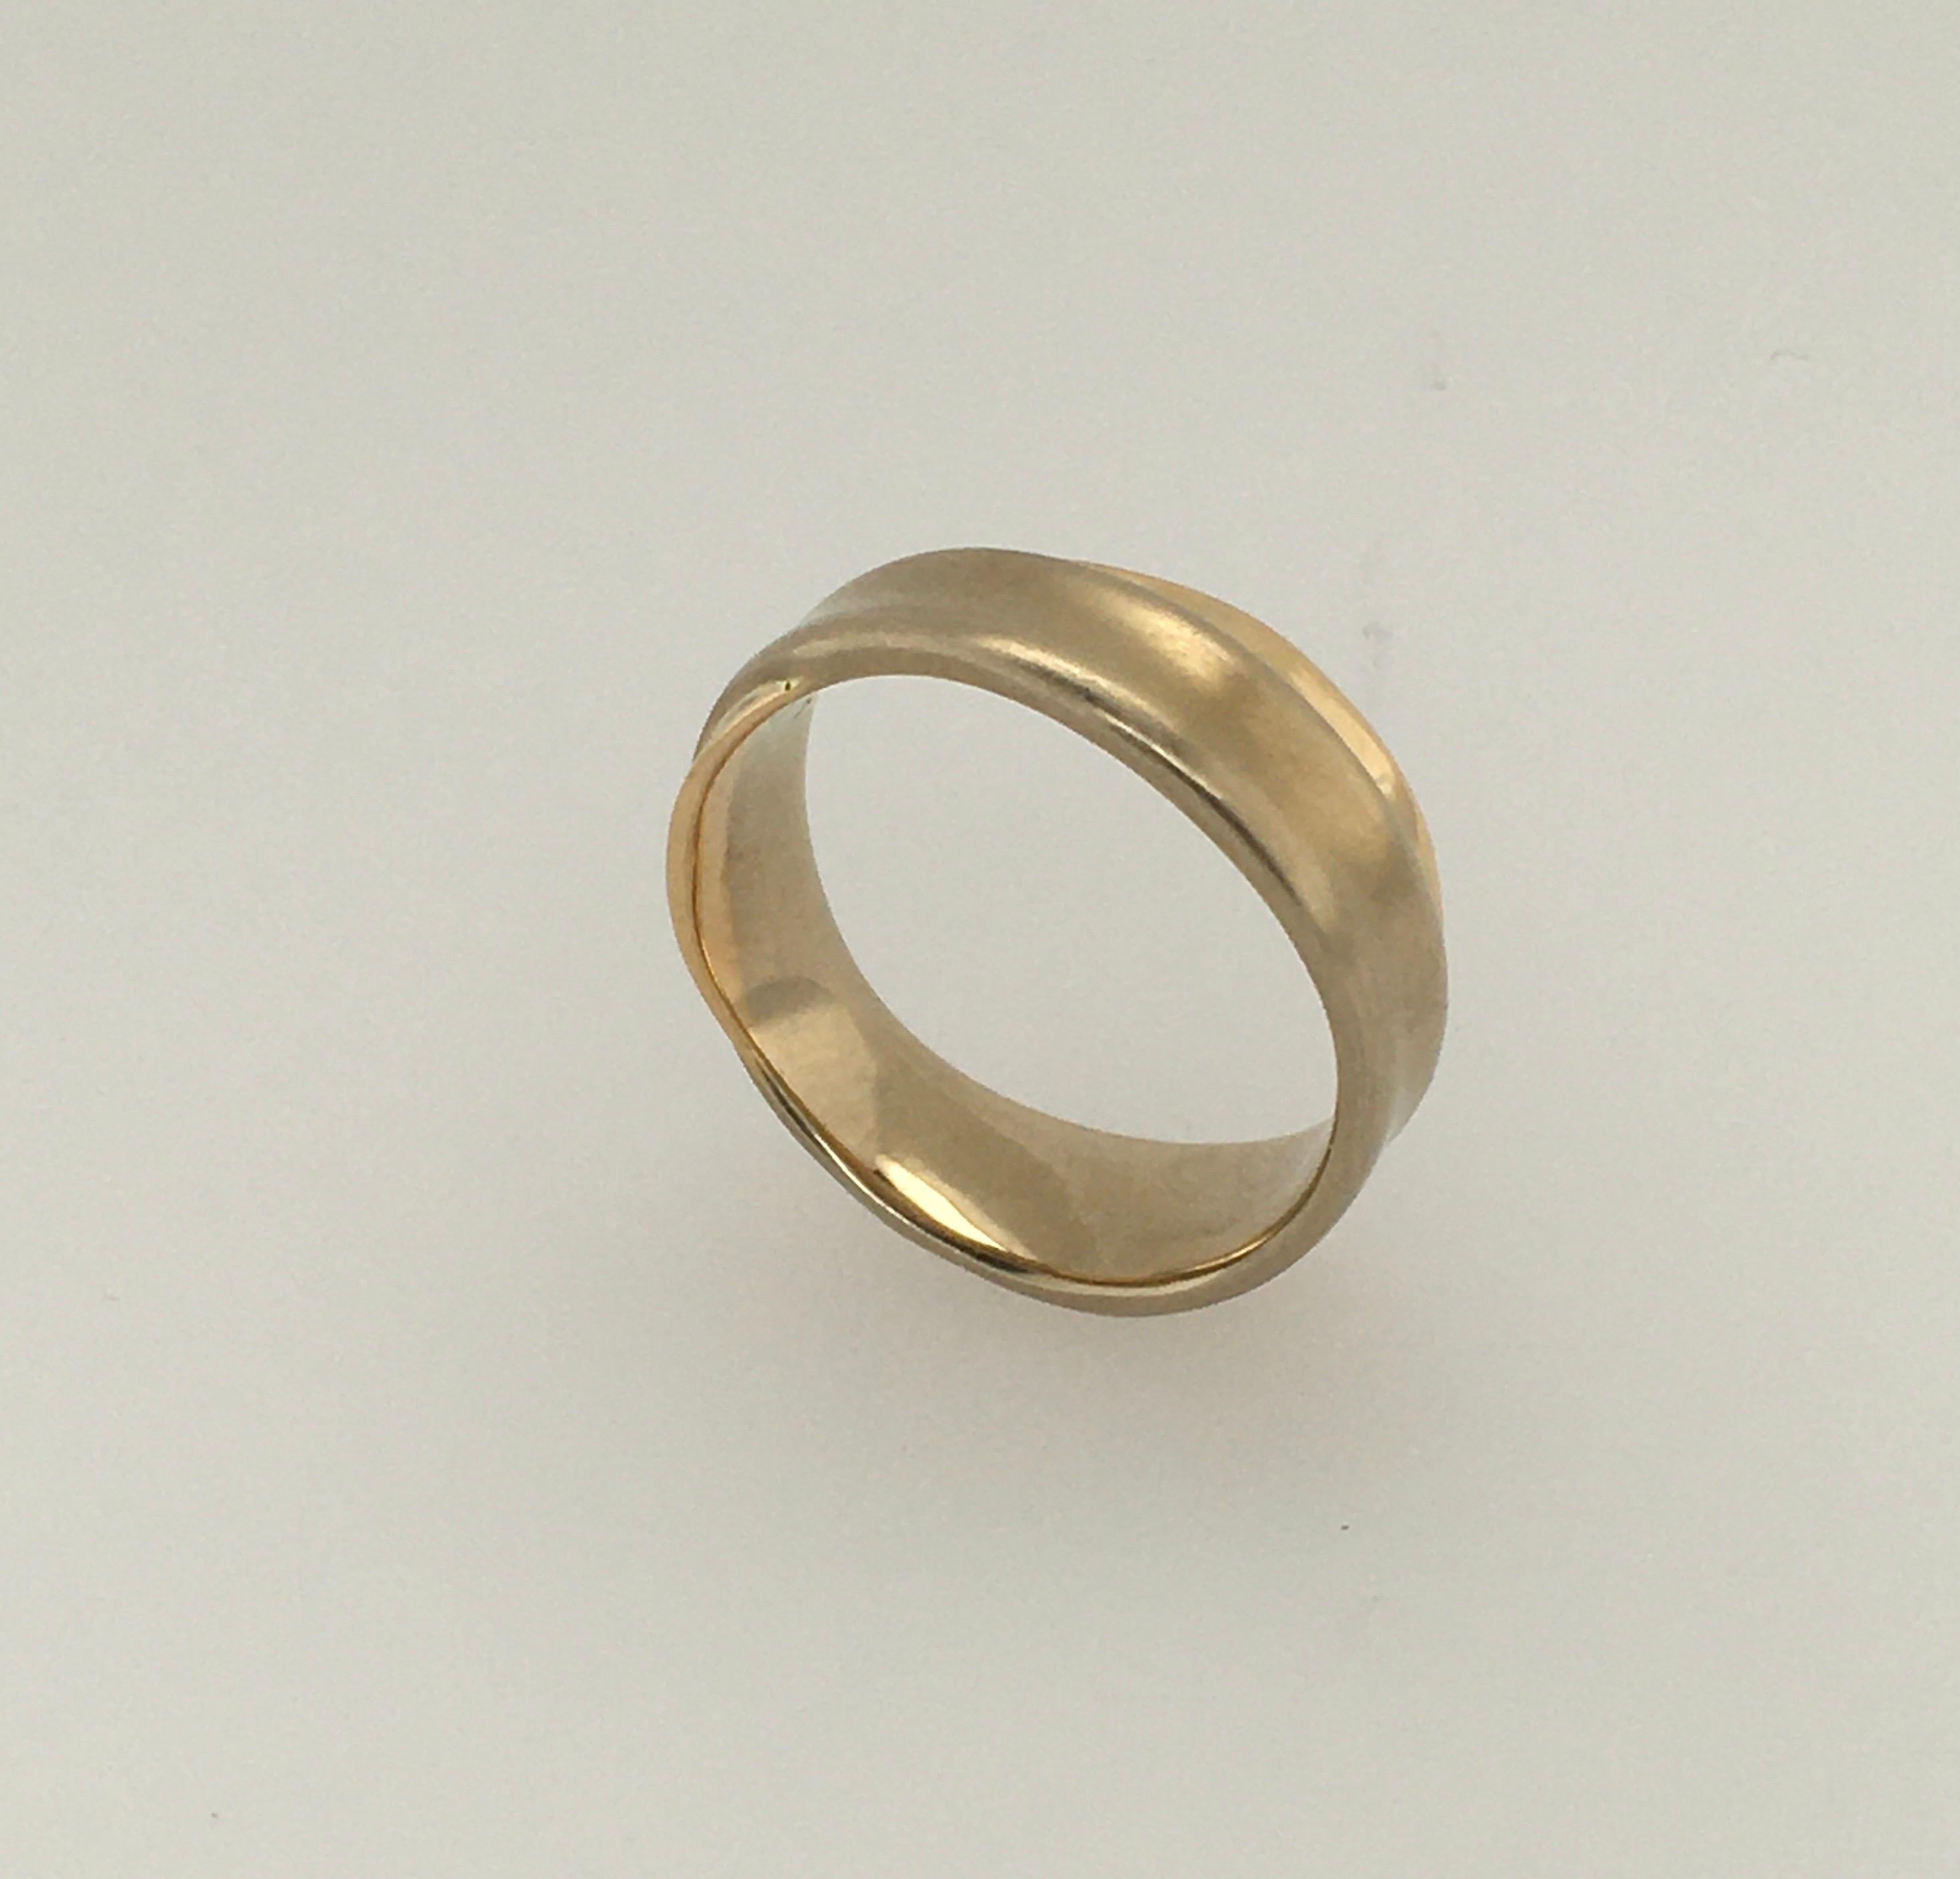 JENNIFER SHIGETOMI  Yellow Gold Satin & Polished Crossroads Ring In Excellent Condition For Sale In Kennebunkport, ME